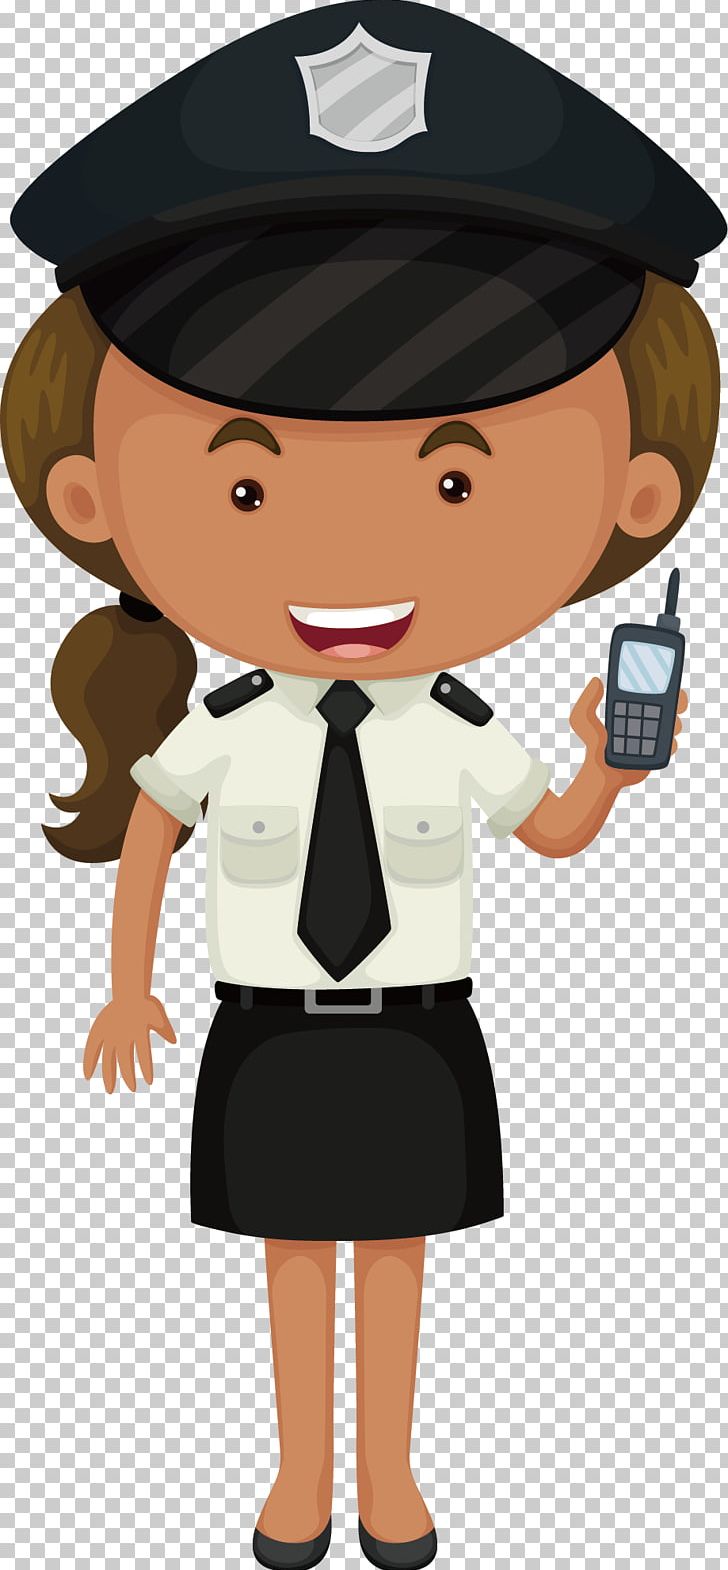 Police Officer PNG, Clipart, Academician, Black, Black Hair, Black White, Cartoon Free PNG Download